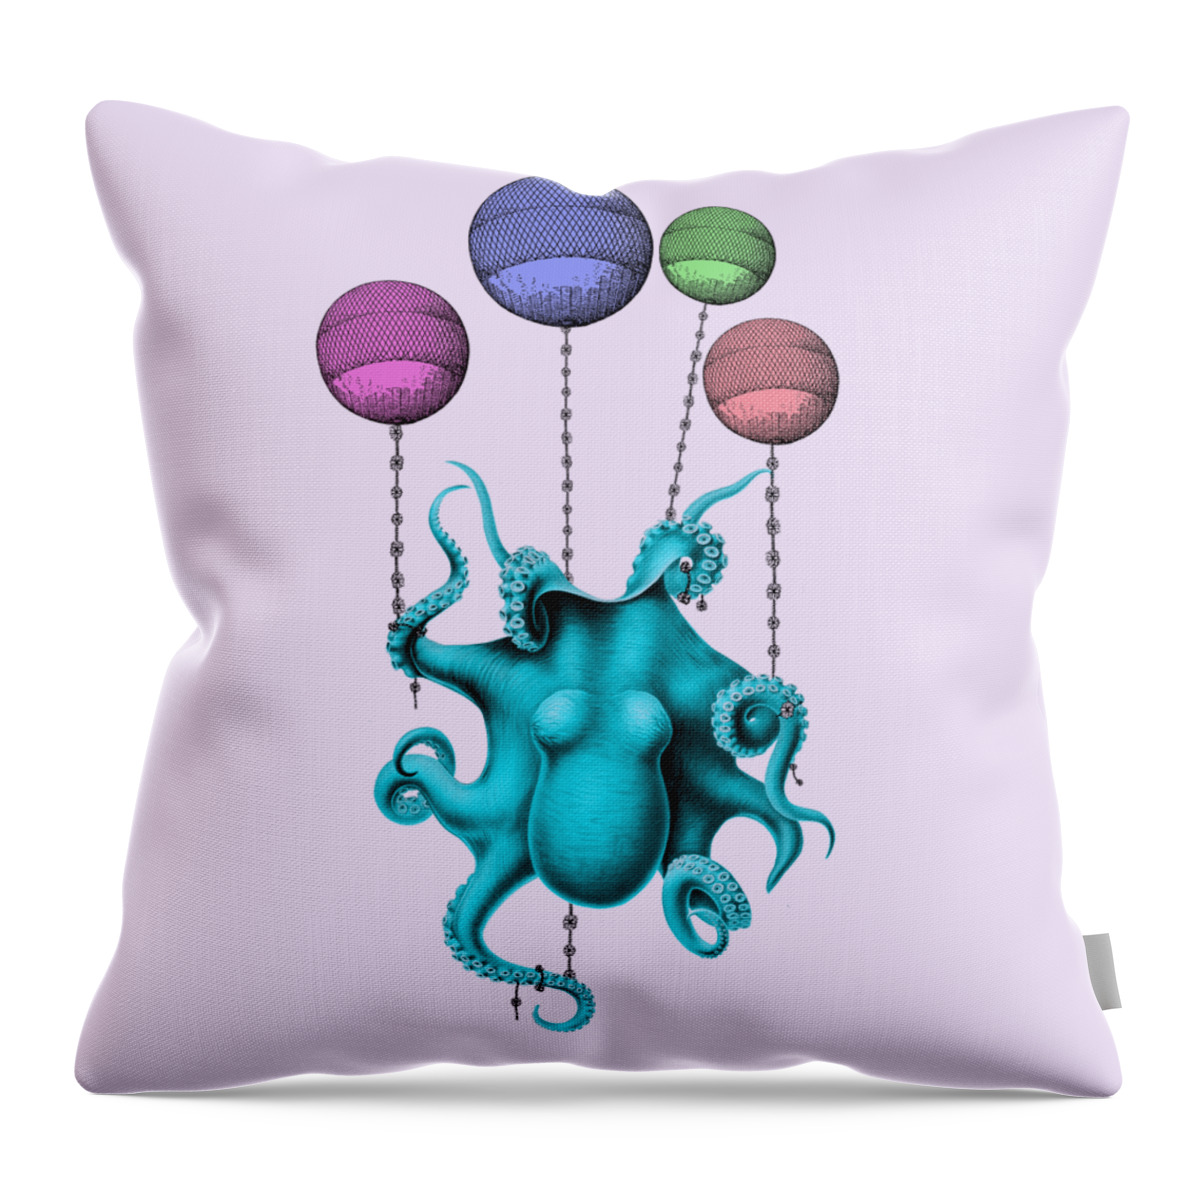 Octopus Throw Pillow featuring the digital art Birthday Boy by Madame Memento